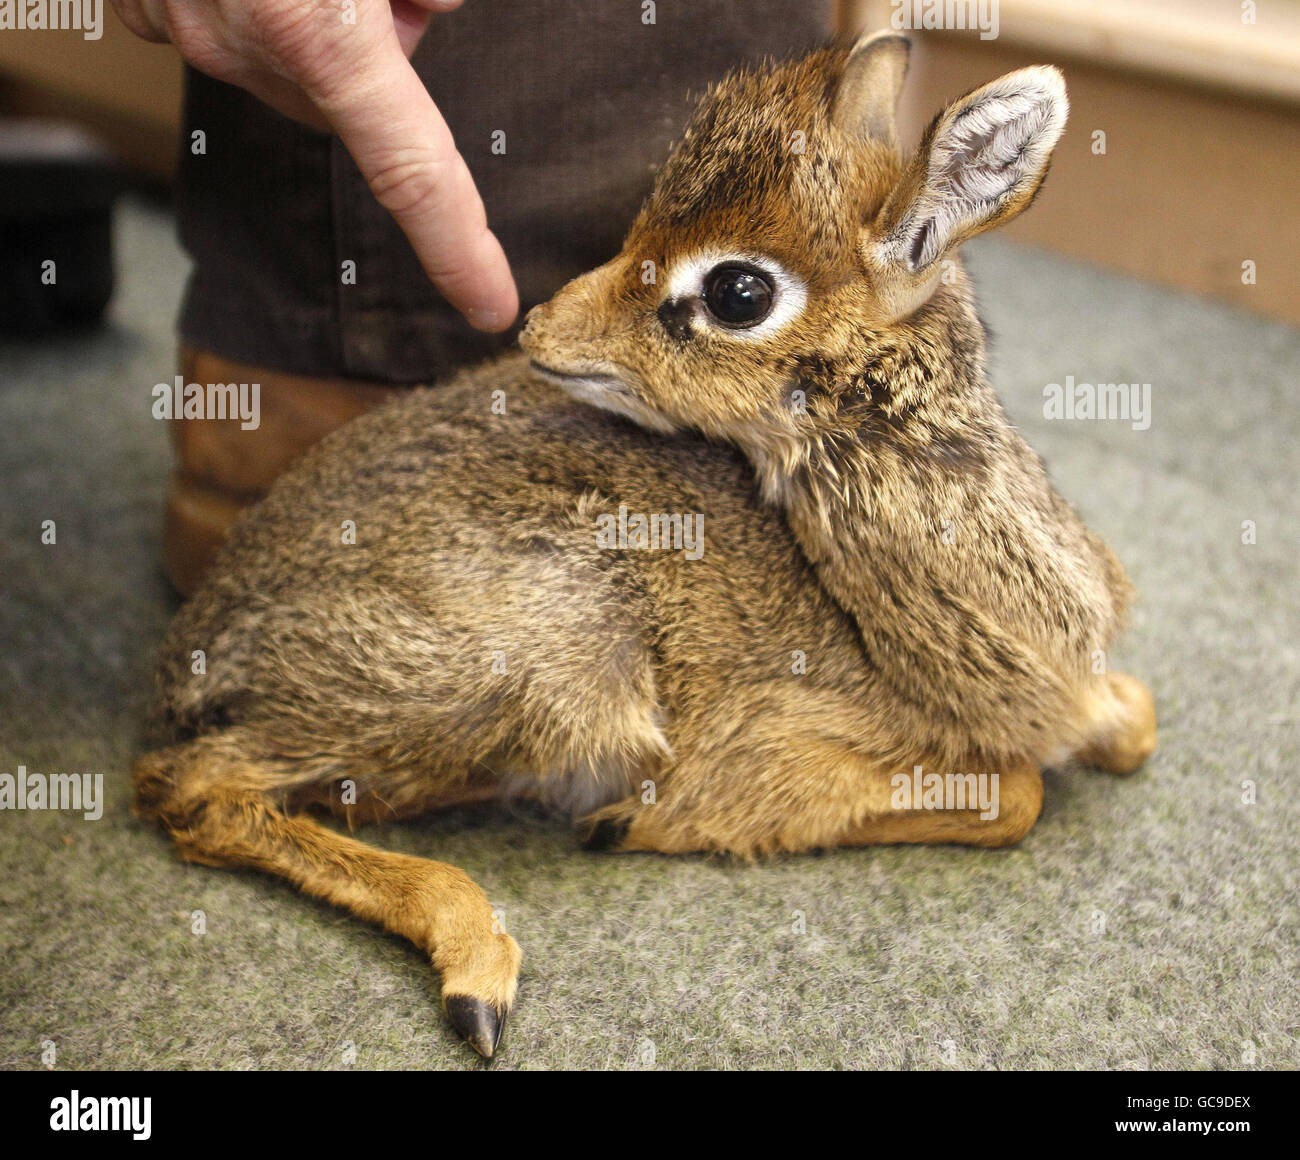 Curator of mammals at Chester Zoo, Tim Rowlands, with a baby dik dik antelope which is being hand reared after it was abandoned by its mother. Stock Photo